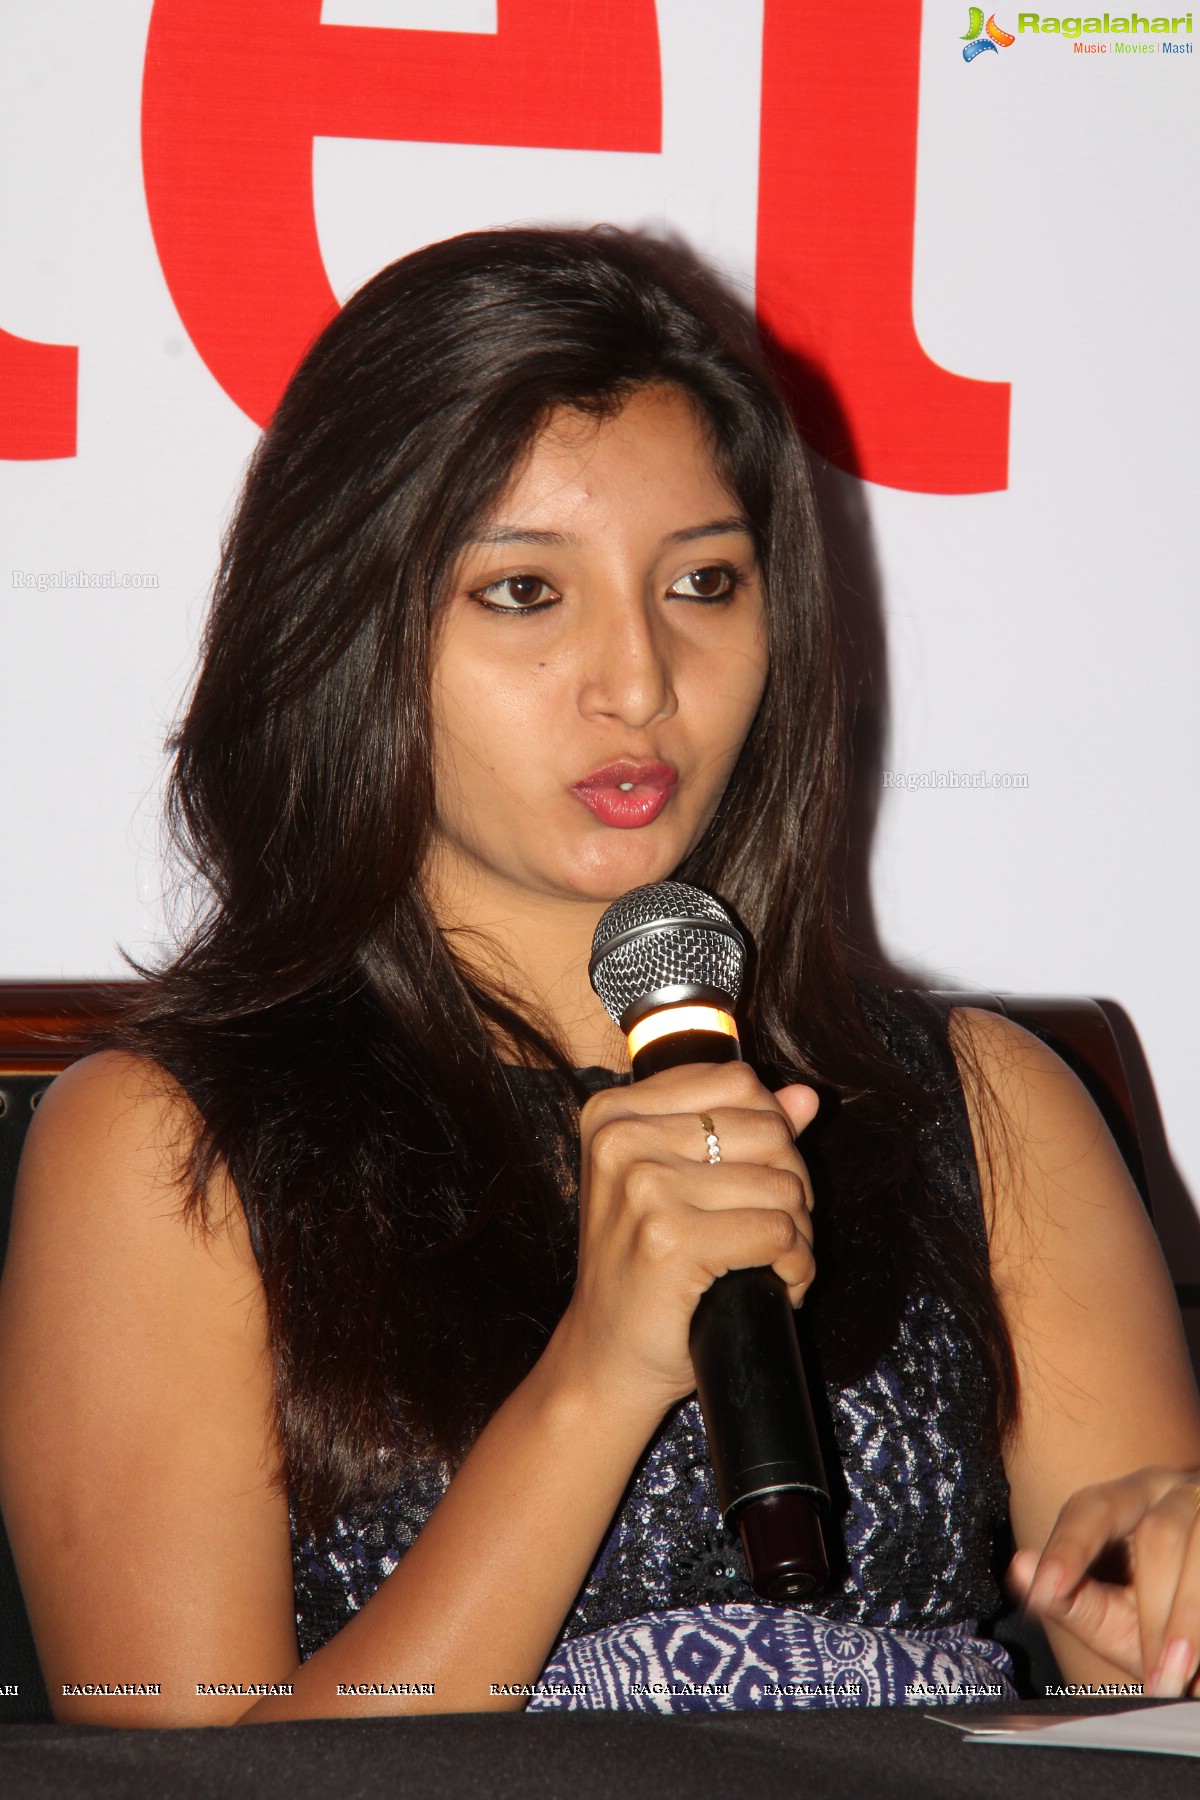 Airtel - 'Happiness Unlimited' Exhibition Press Meet